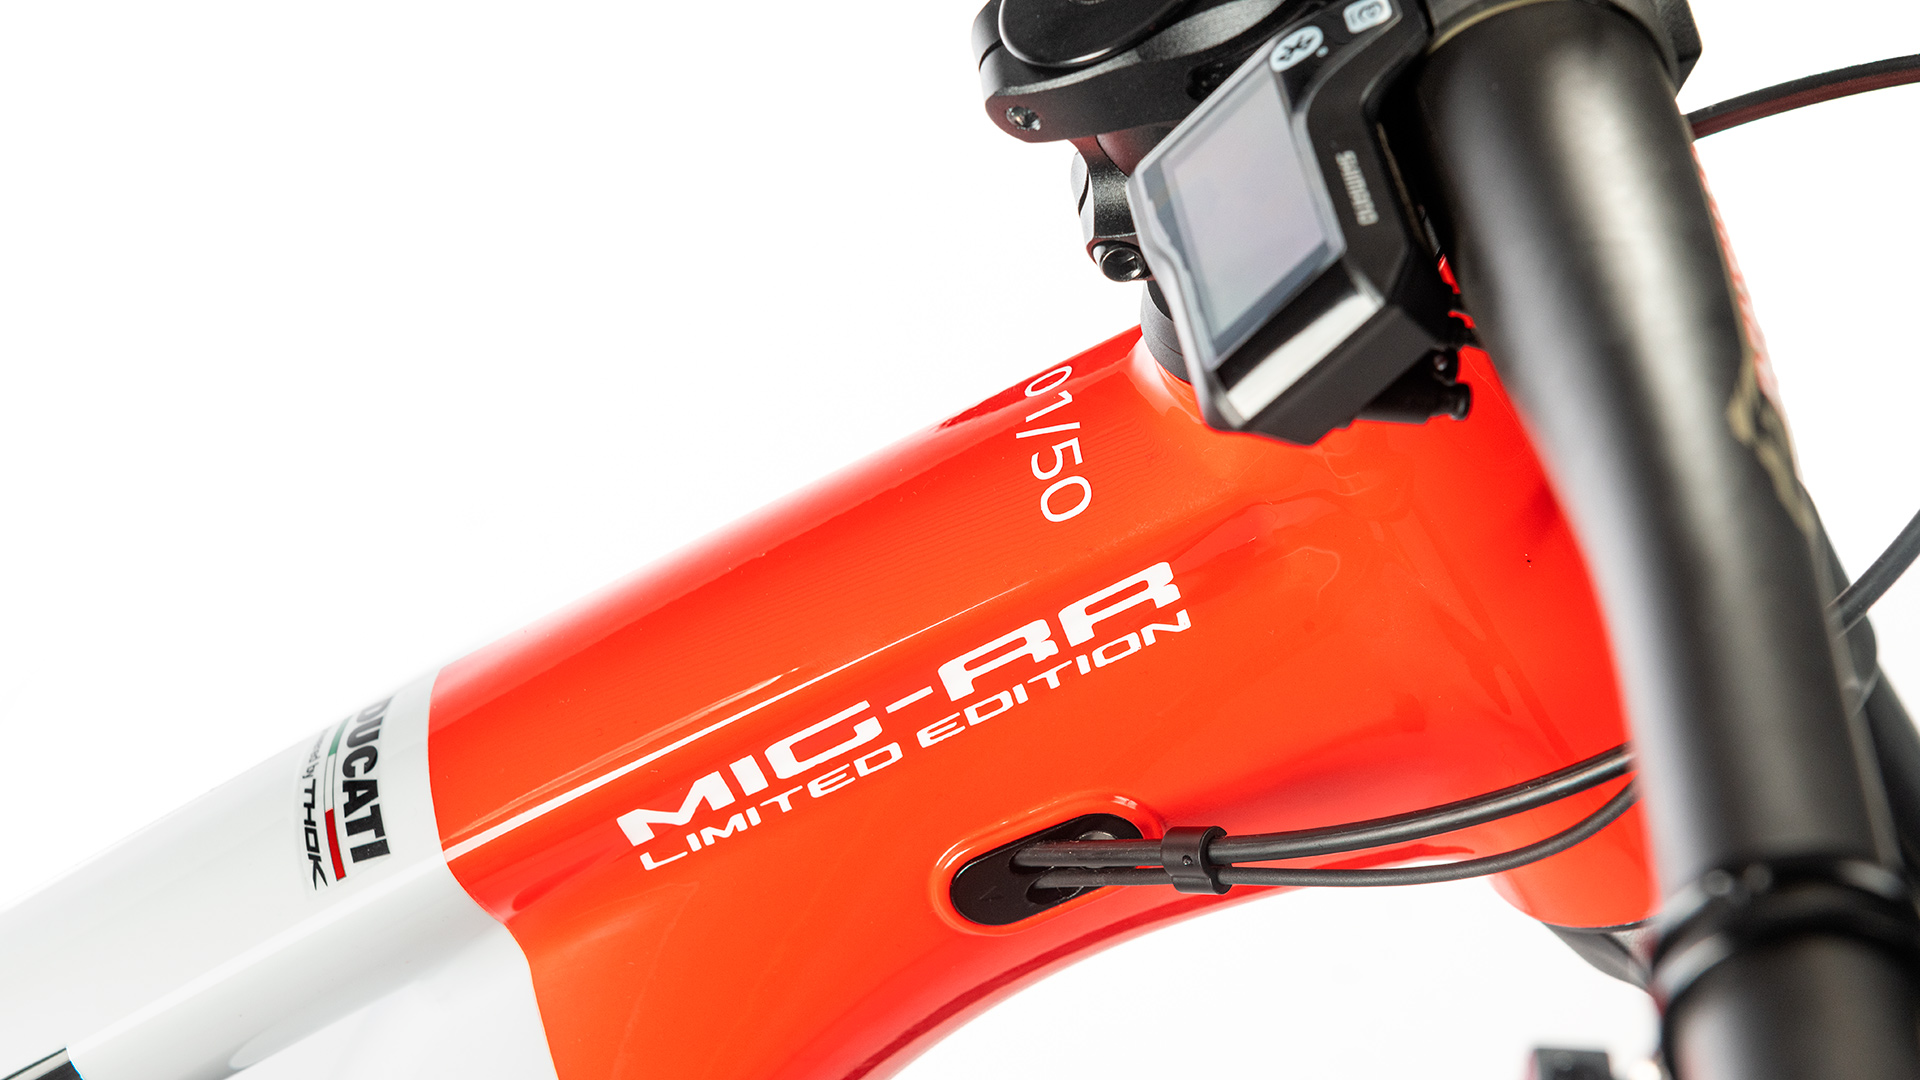 Ducati MIG-RR Limited Edition